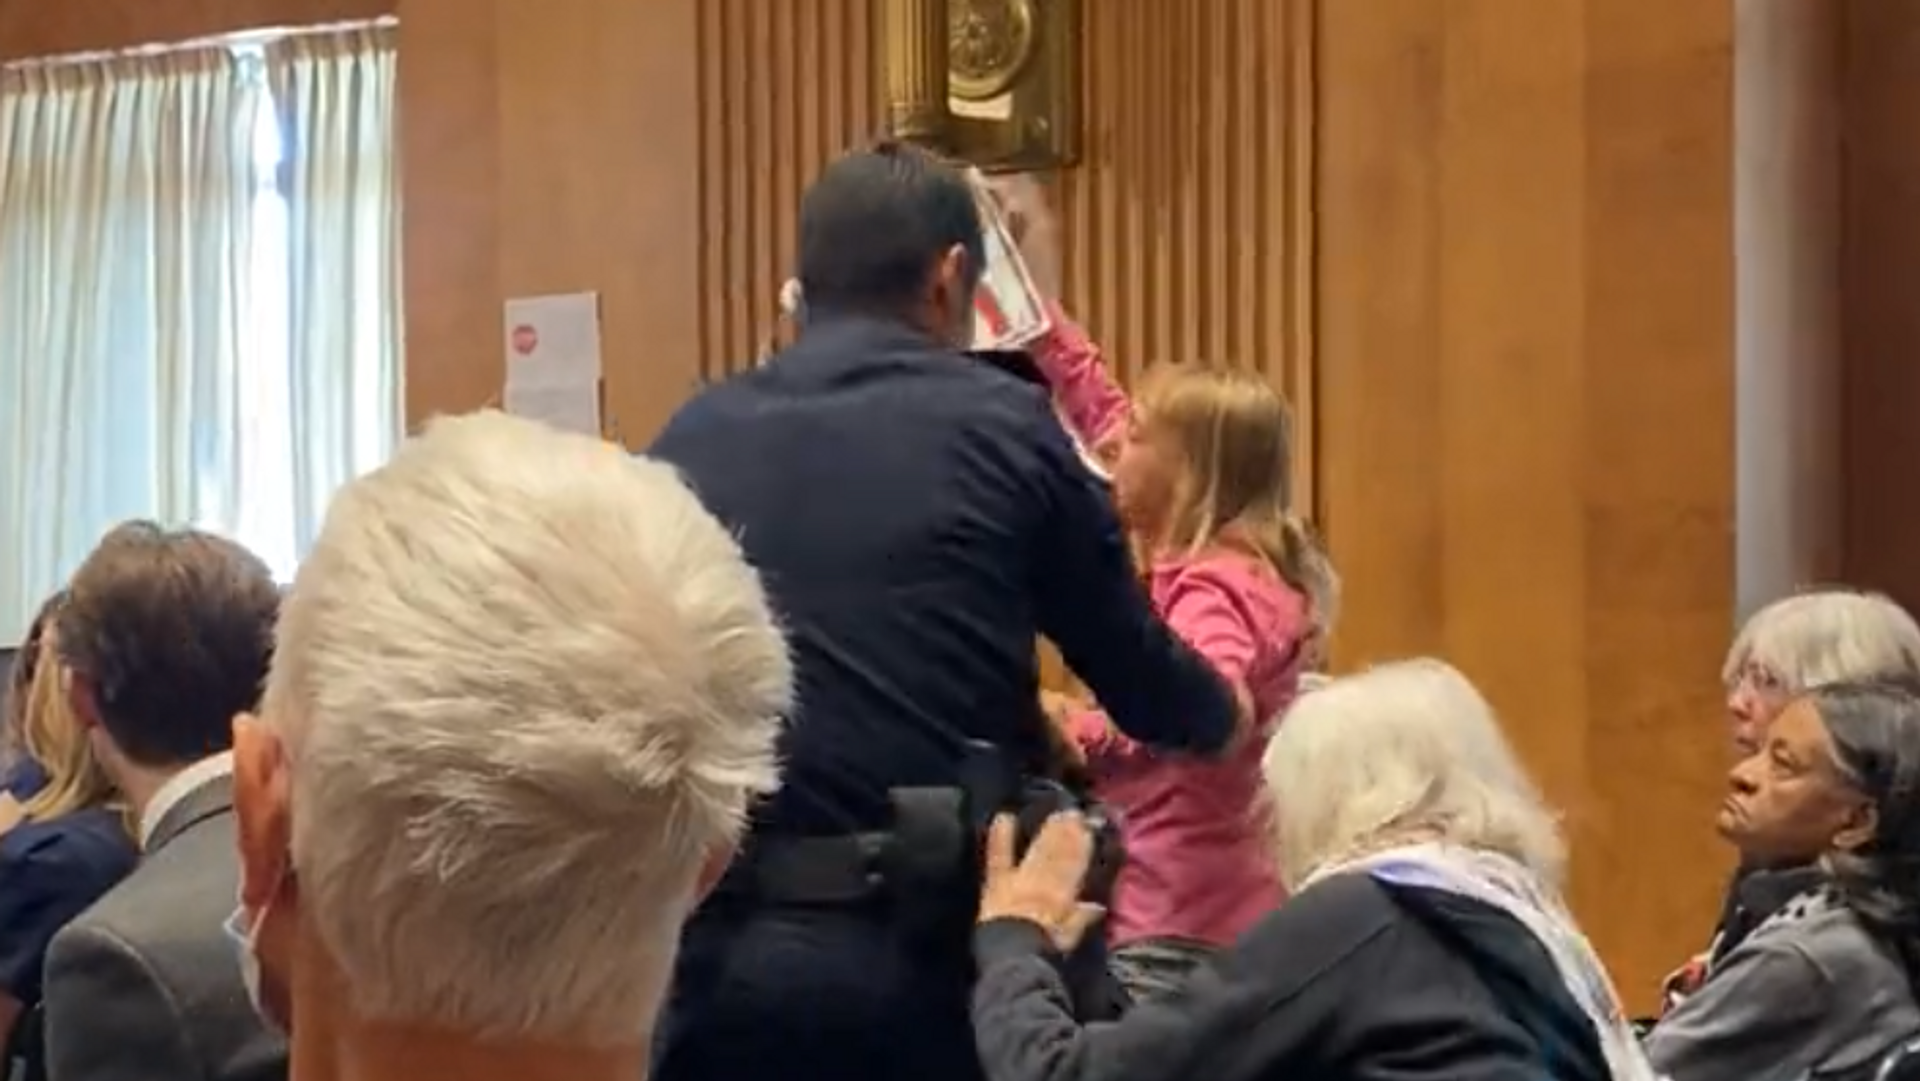 Image captures moment that CODEPINK co-founder Medea Benjamin was forcibly removed from a Senate committee hearing during testimony given by US Secretary Antony Blinken. - Sputnik International, 1920, 23.03.2023